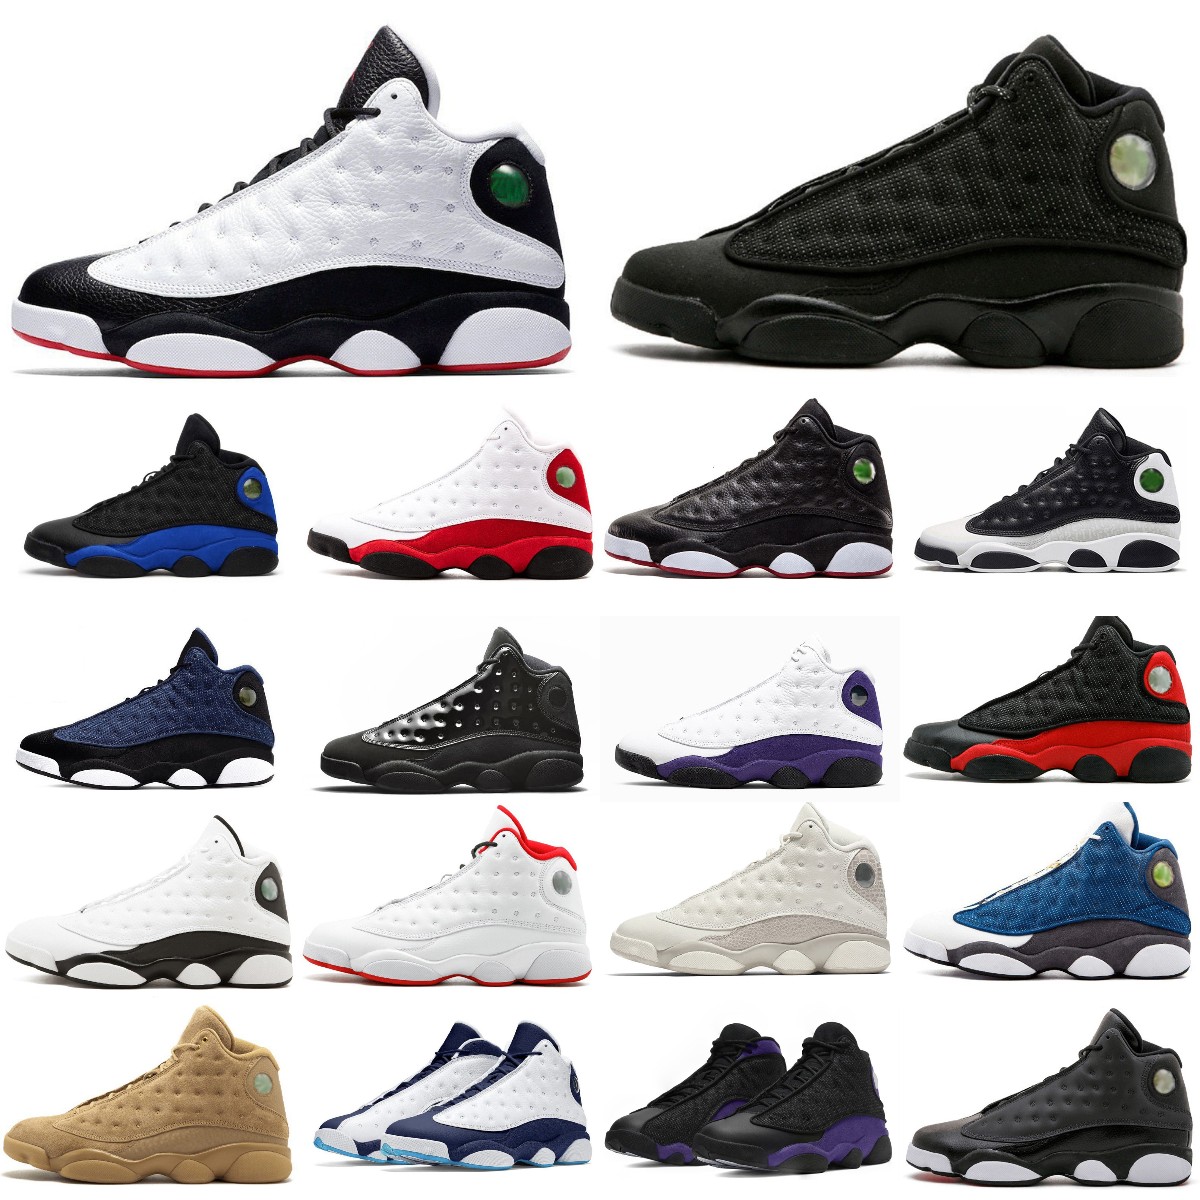 NEW 13s men women basketball shoes 13 French Brave Blue Del Sol Obsidian Flint Court Purple Starfish Black Cat Bred mens trainers outdoor sports sneakers 40-46